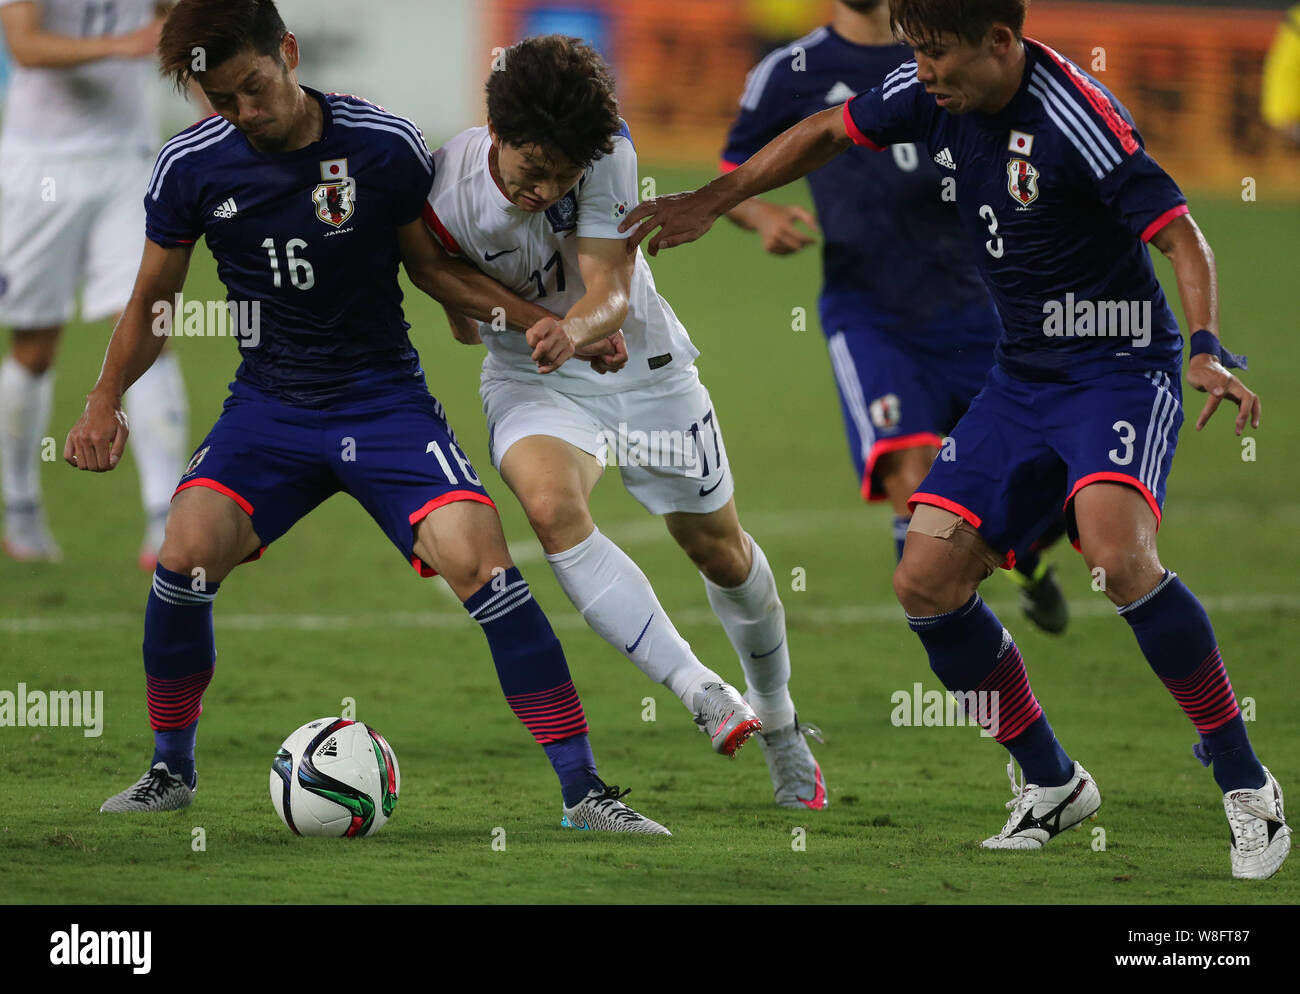 Hotaru Yamaguchi, left, and Ota Kosuke, right, of Japan challenge Lee Sung-Jae of South Korea during their soccer match of the Men's East Asian Cup 20 Stock Photo